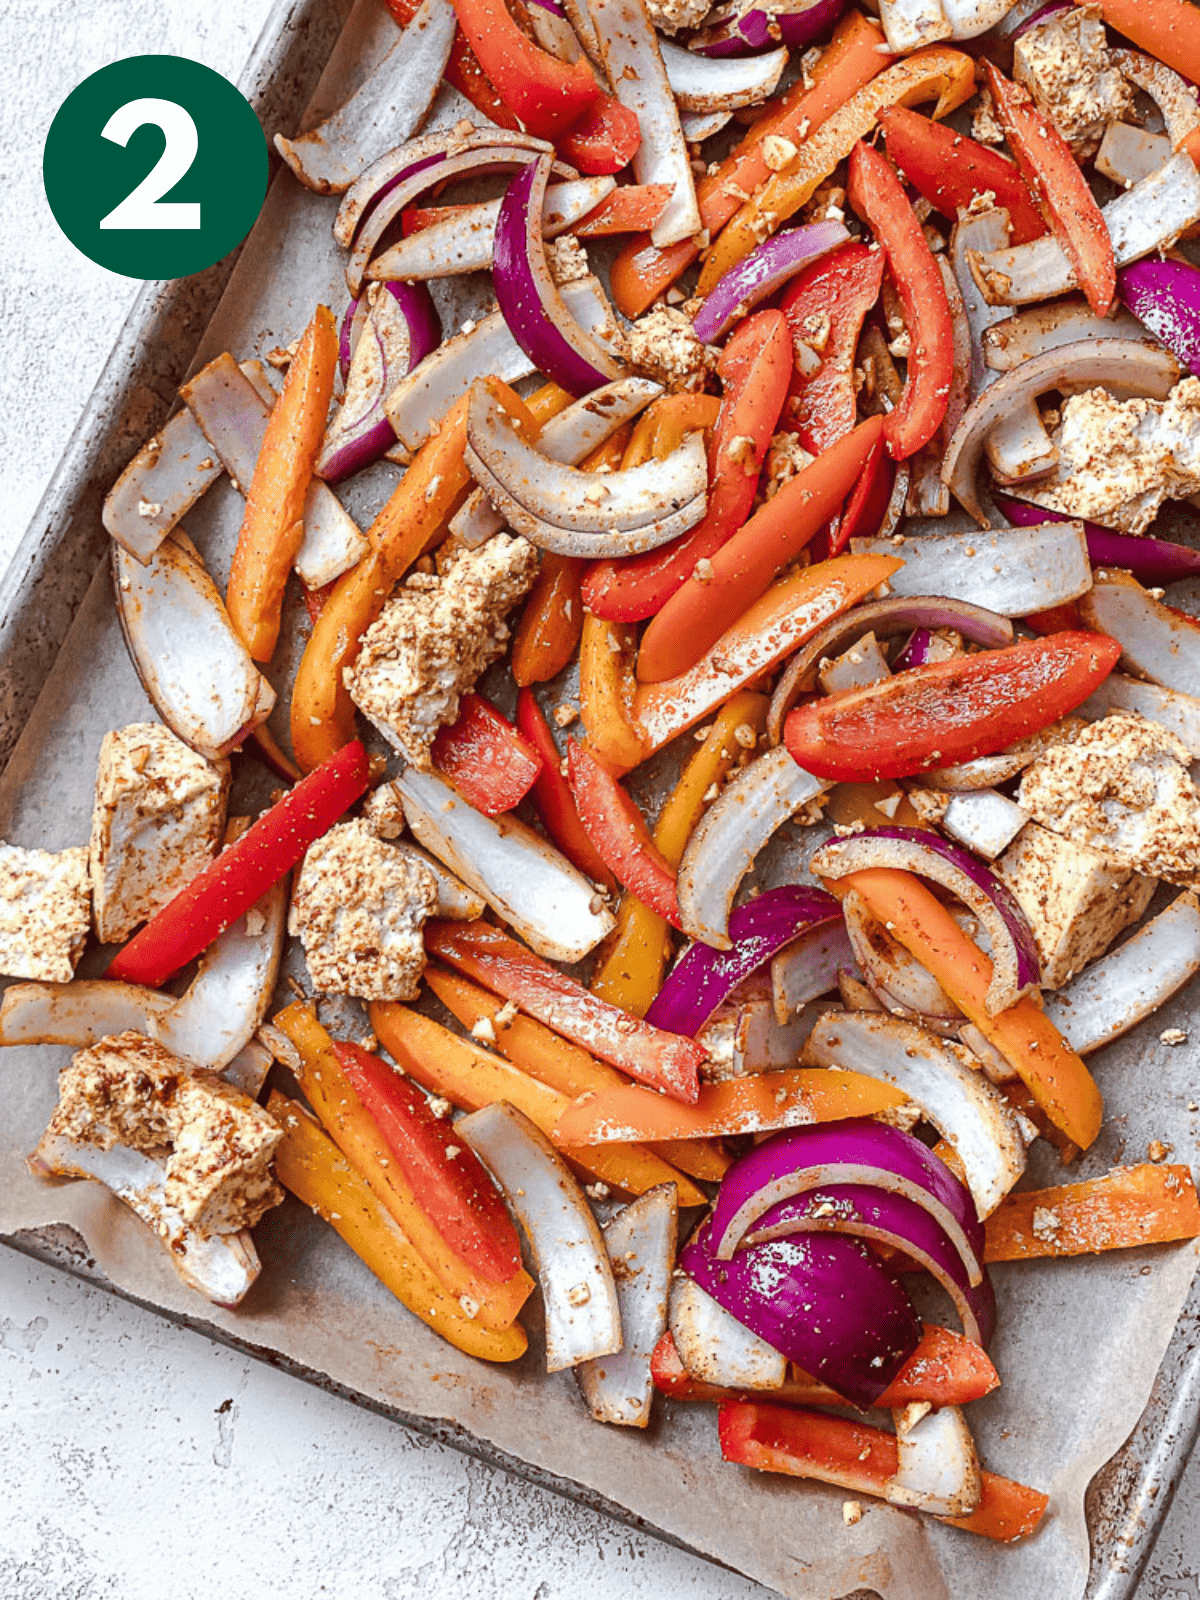 seasoned onions, bell peppers, and tofu chunks on a parchment-lined baking sheet.